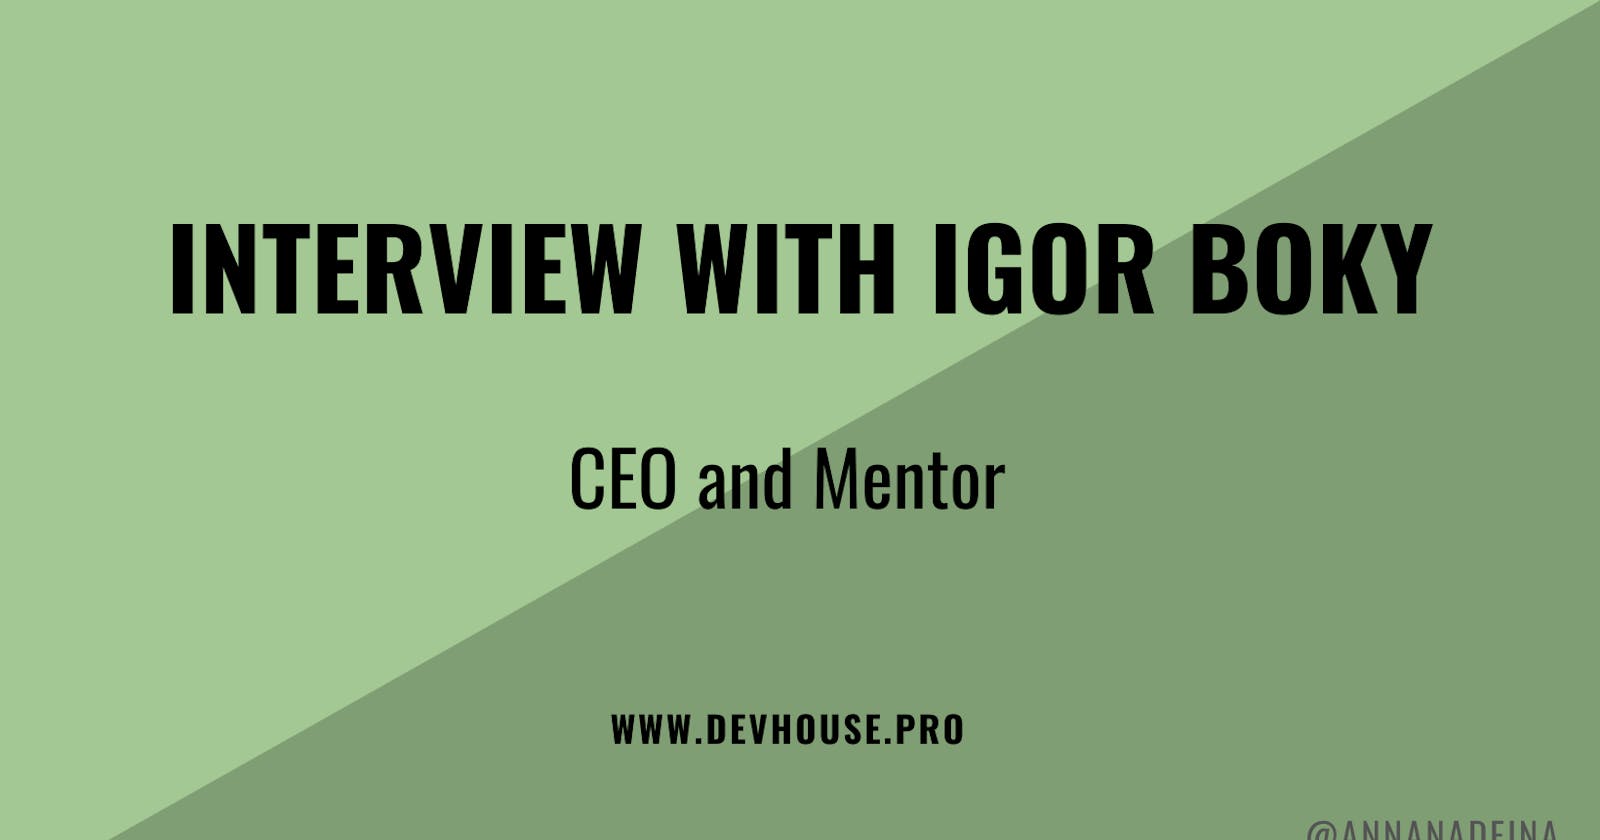 Interview with Igor Boky, CEO and Mentor